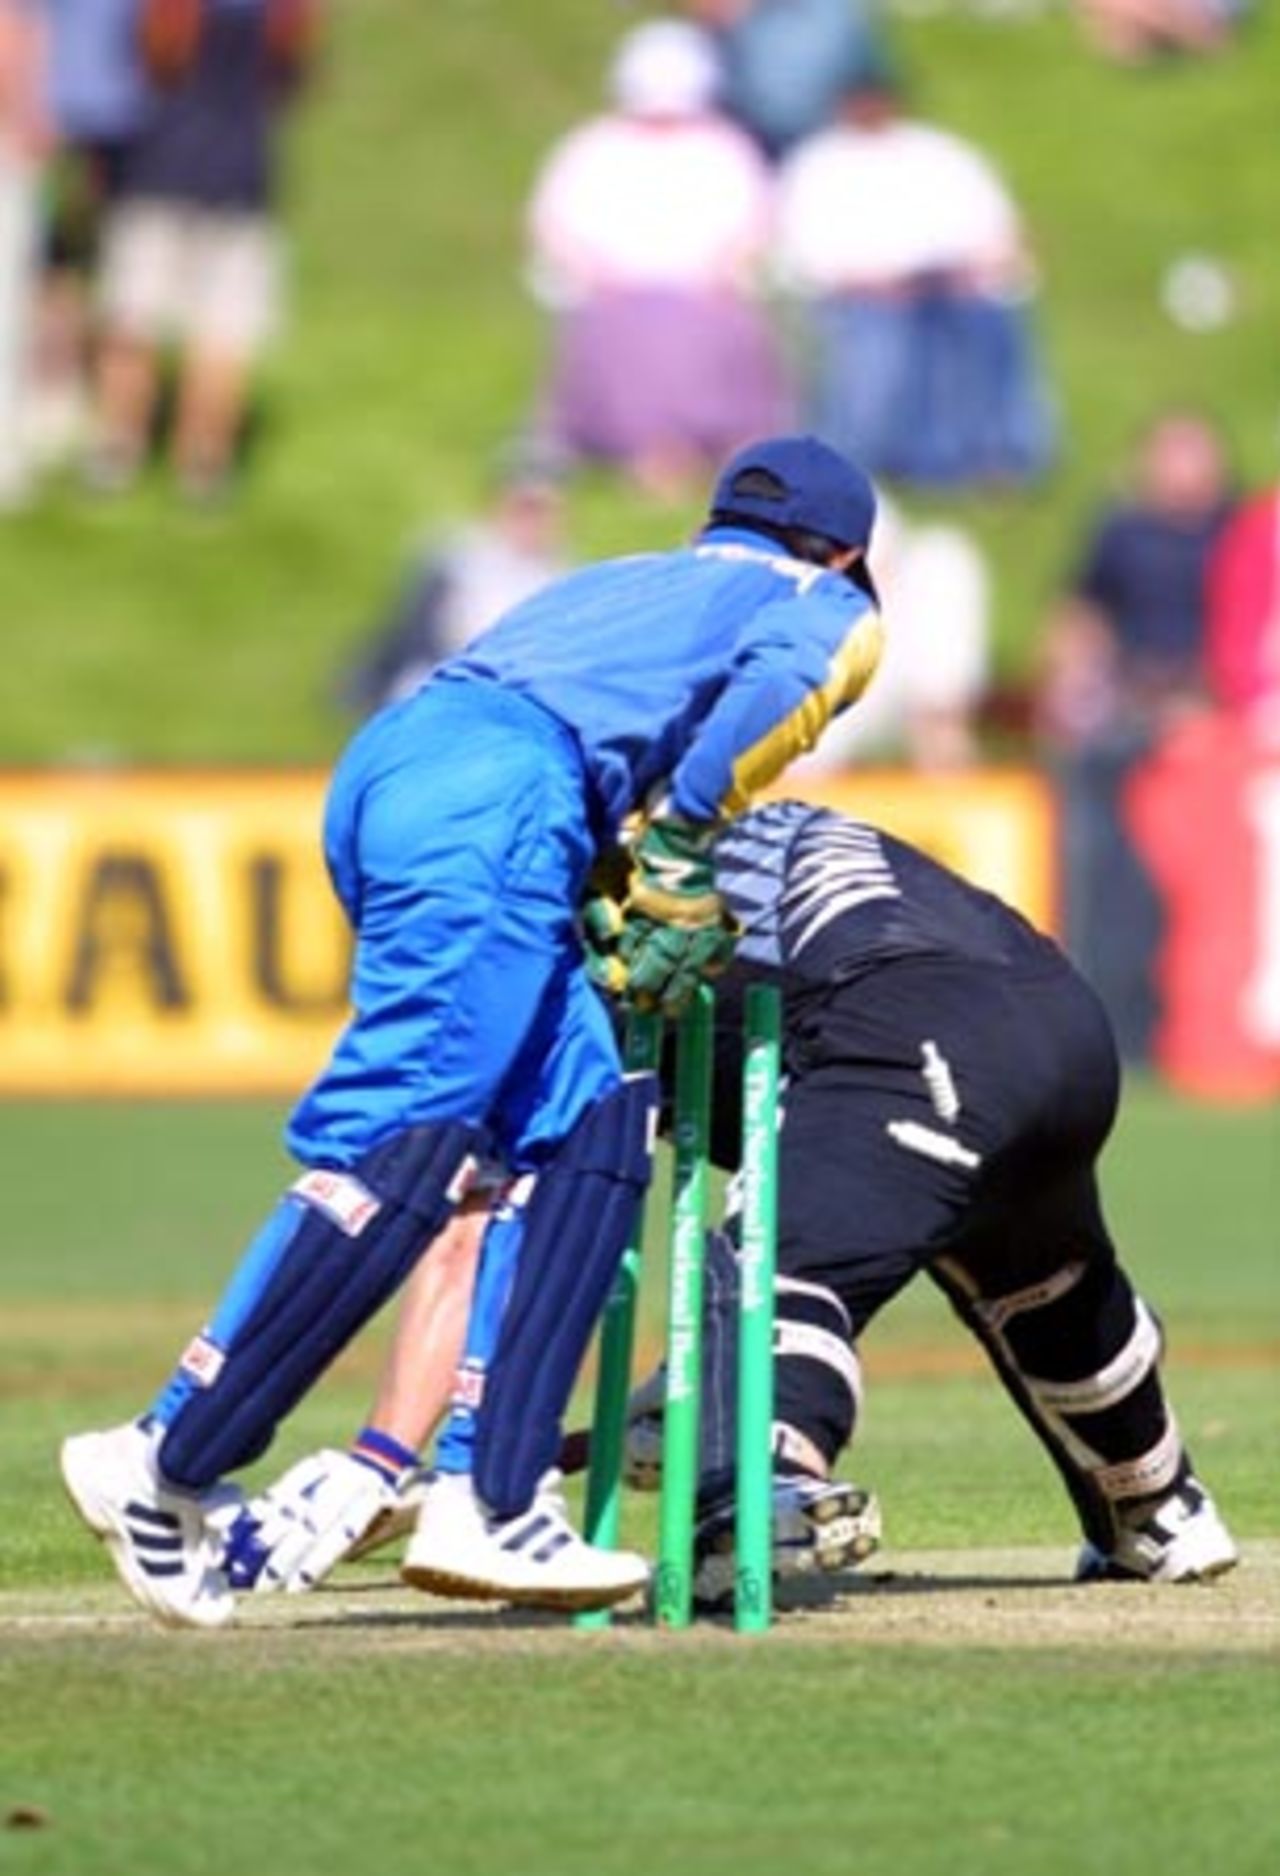 New Zealand batsman Roger Twose unsuccessfully attempts to stretch the back foot back inside the crease as he is stumped by Sri Lankan wicket-keeper Romesh Kaluwitharana off the bowling of off spinner Mutiah Muralitharan for 20. 4th One-Day International: New Zealand v Sri Lanka at WestpacTrust Park, Hamilton, 8 February 2001.